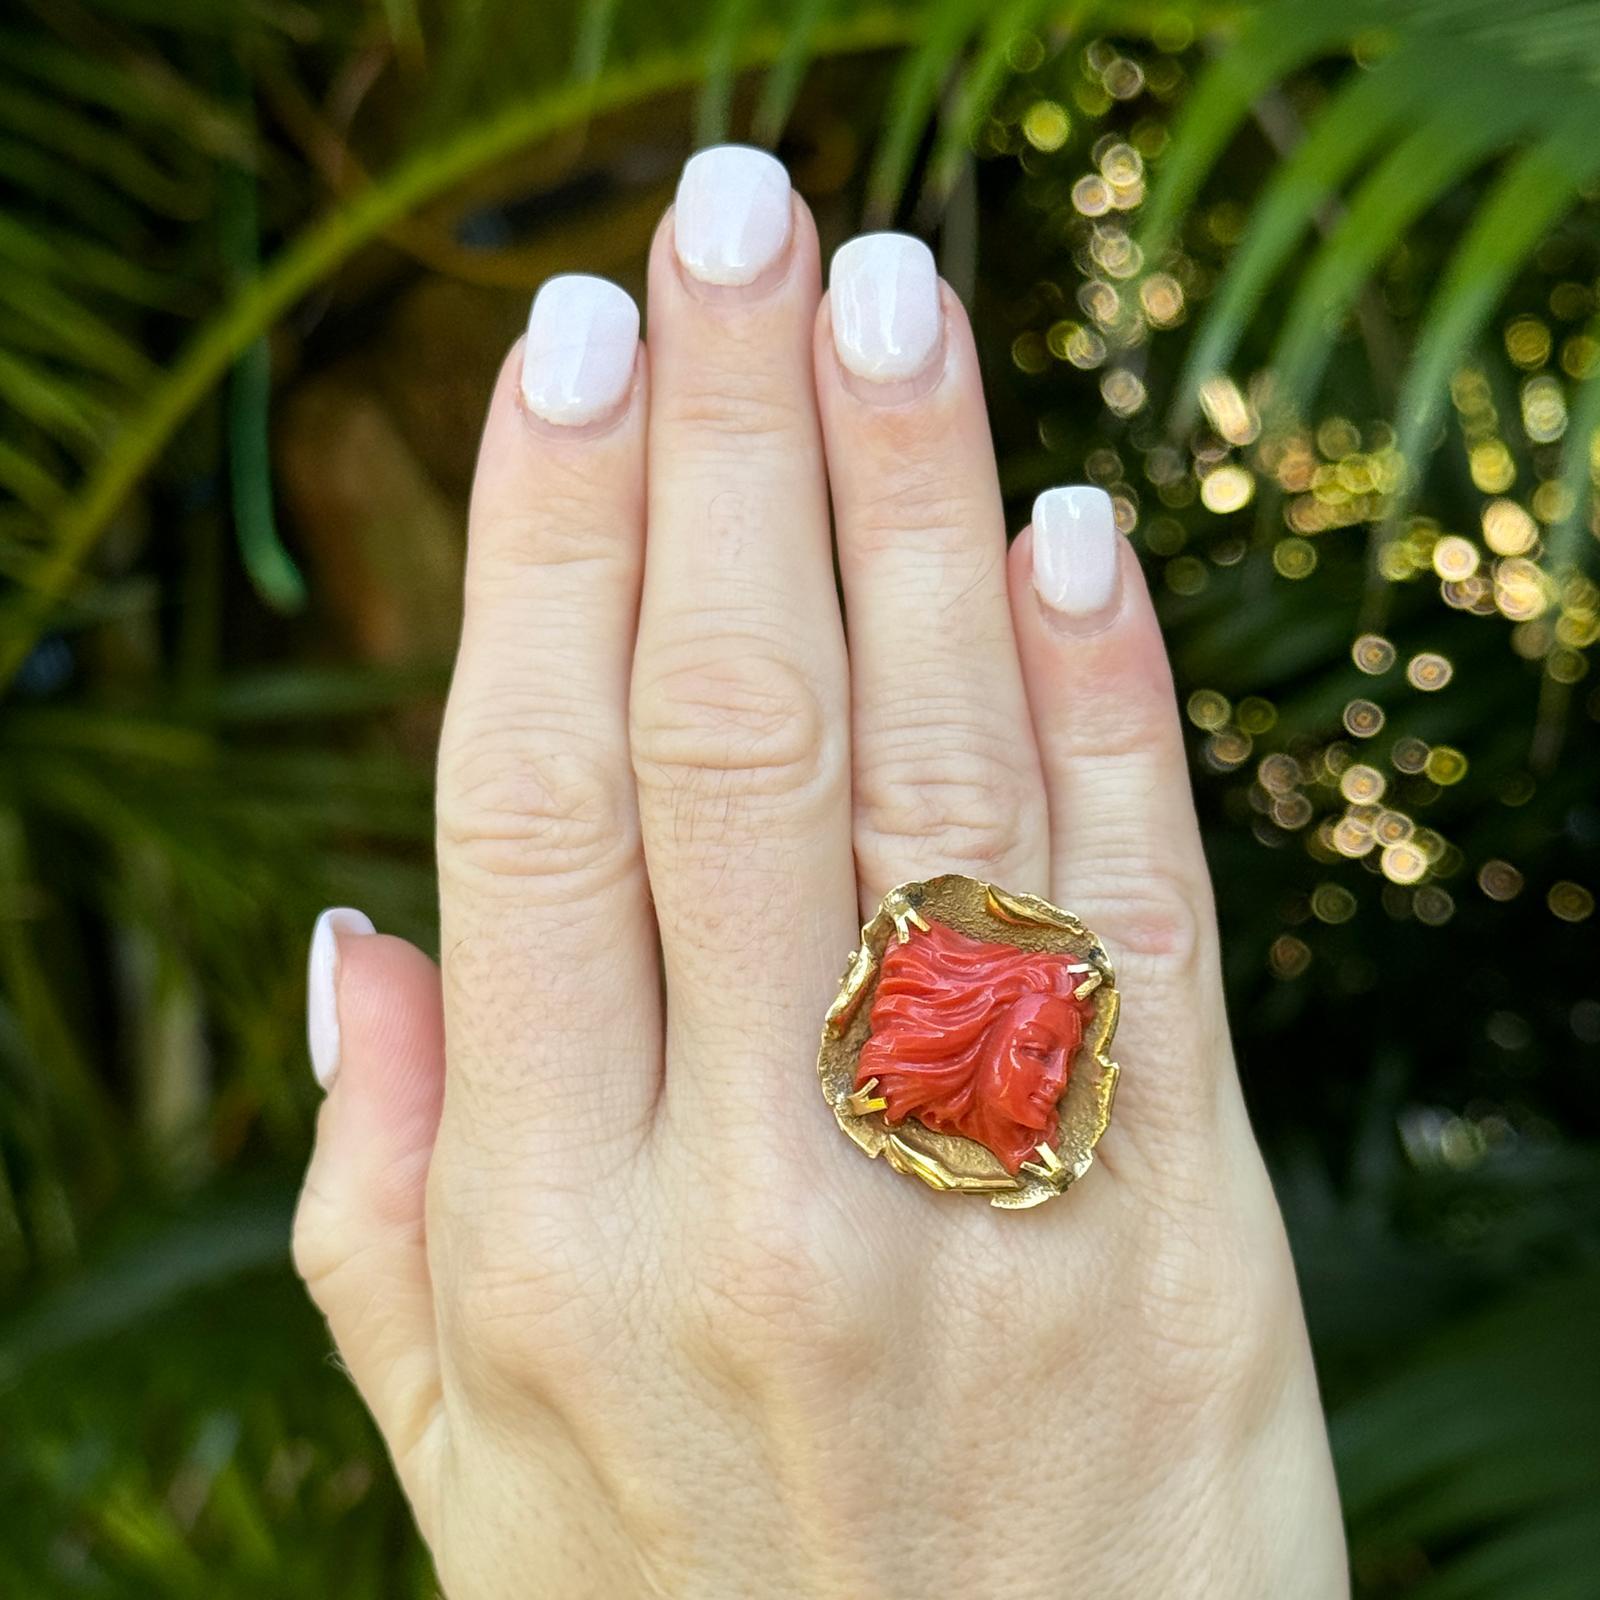 Carved coral estate ring handcrafted in 18 karat yellow gold. The ring features a carved solid orange coral set in free form 18 karat yellow gold. The ring is currently size 7 (can be sized) and the top measures 1.25 x 1.25 inches. The shank